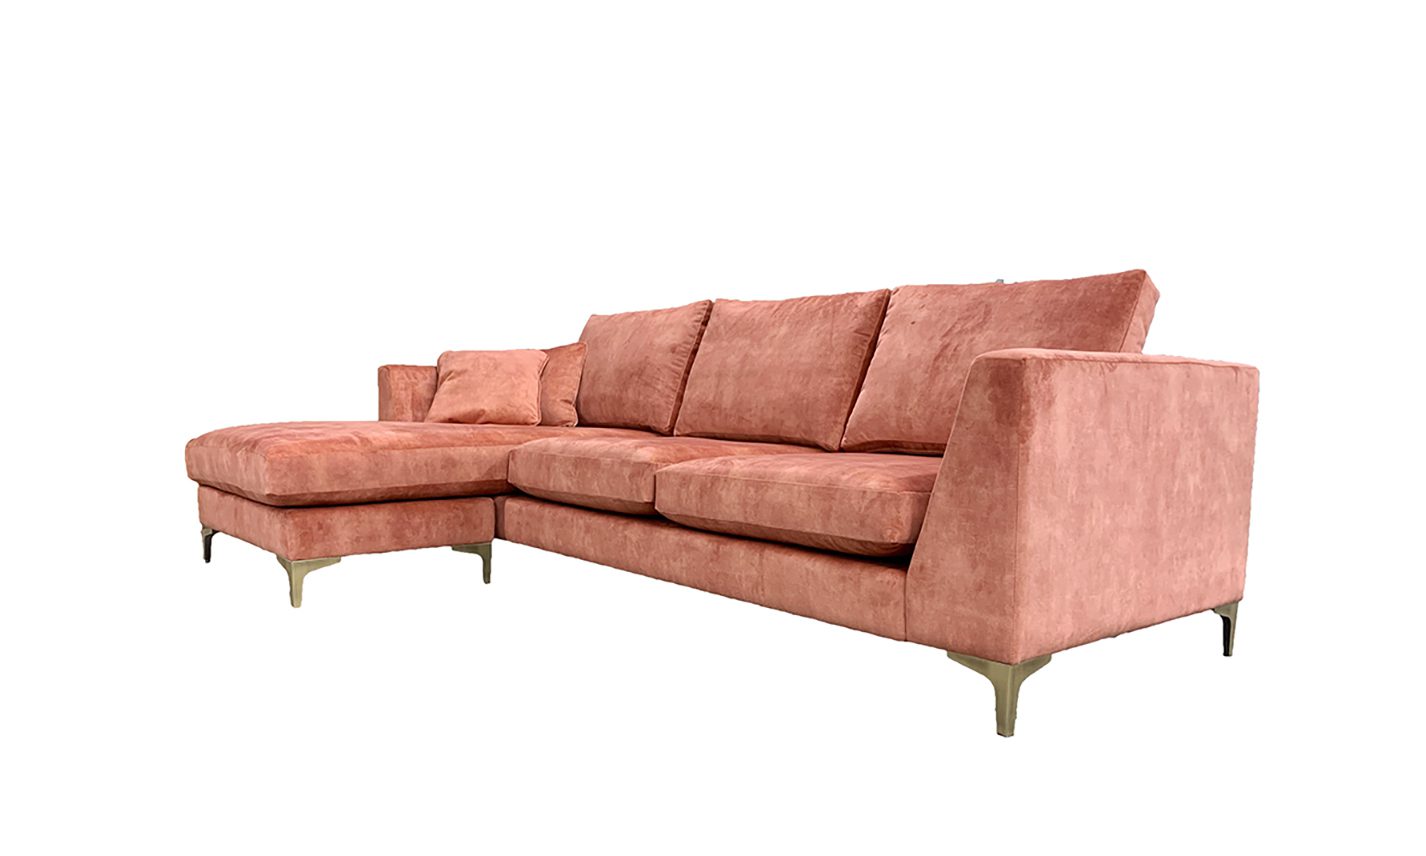 Baltimore 3 Seater Longer Sofa in Lovely Coral